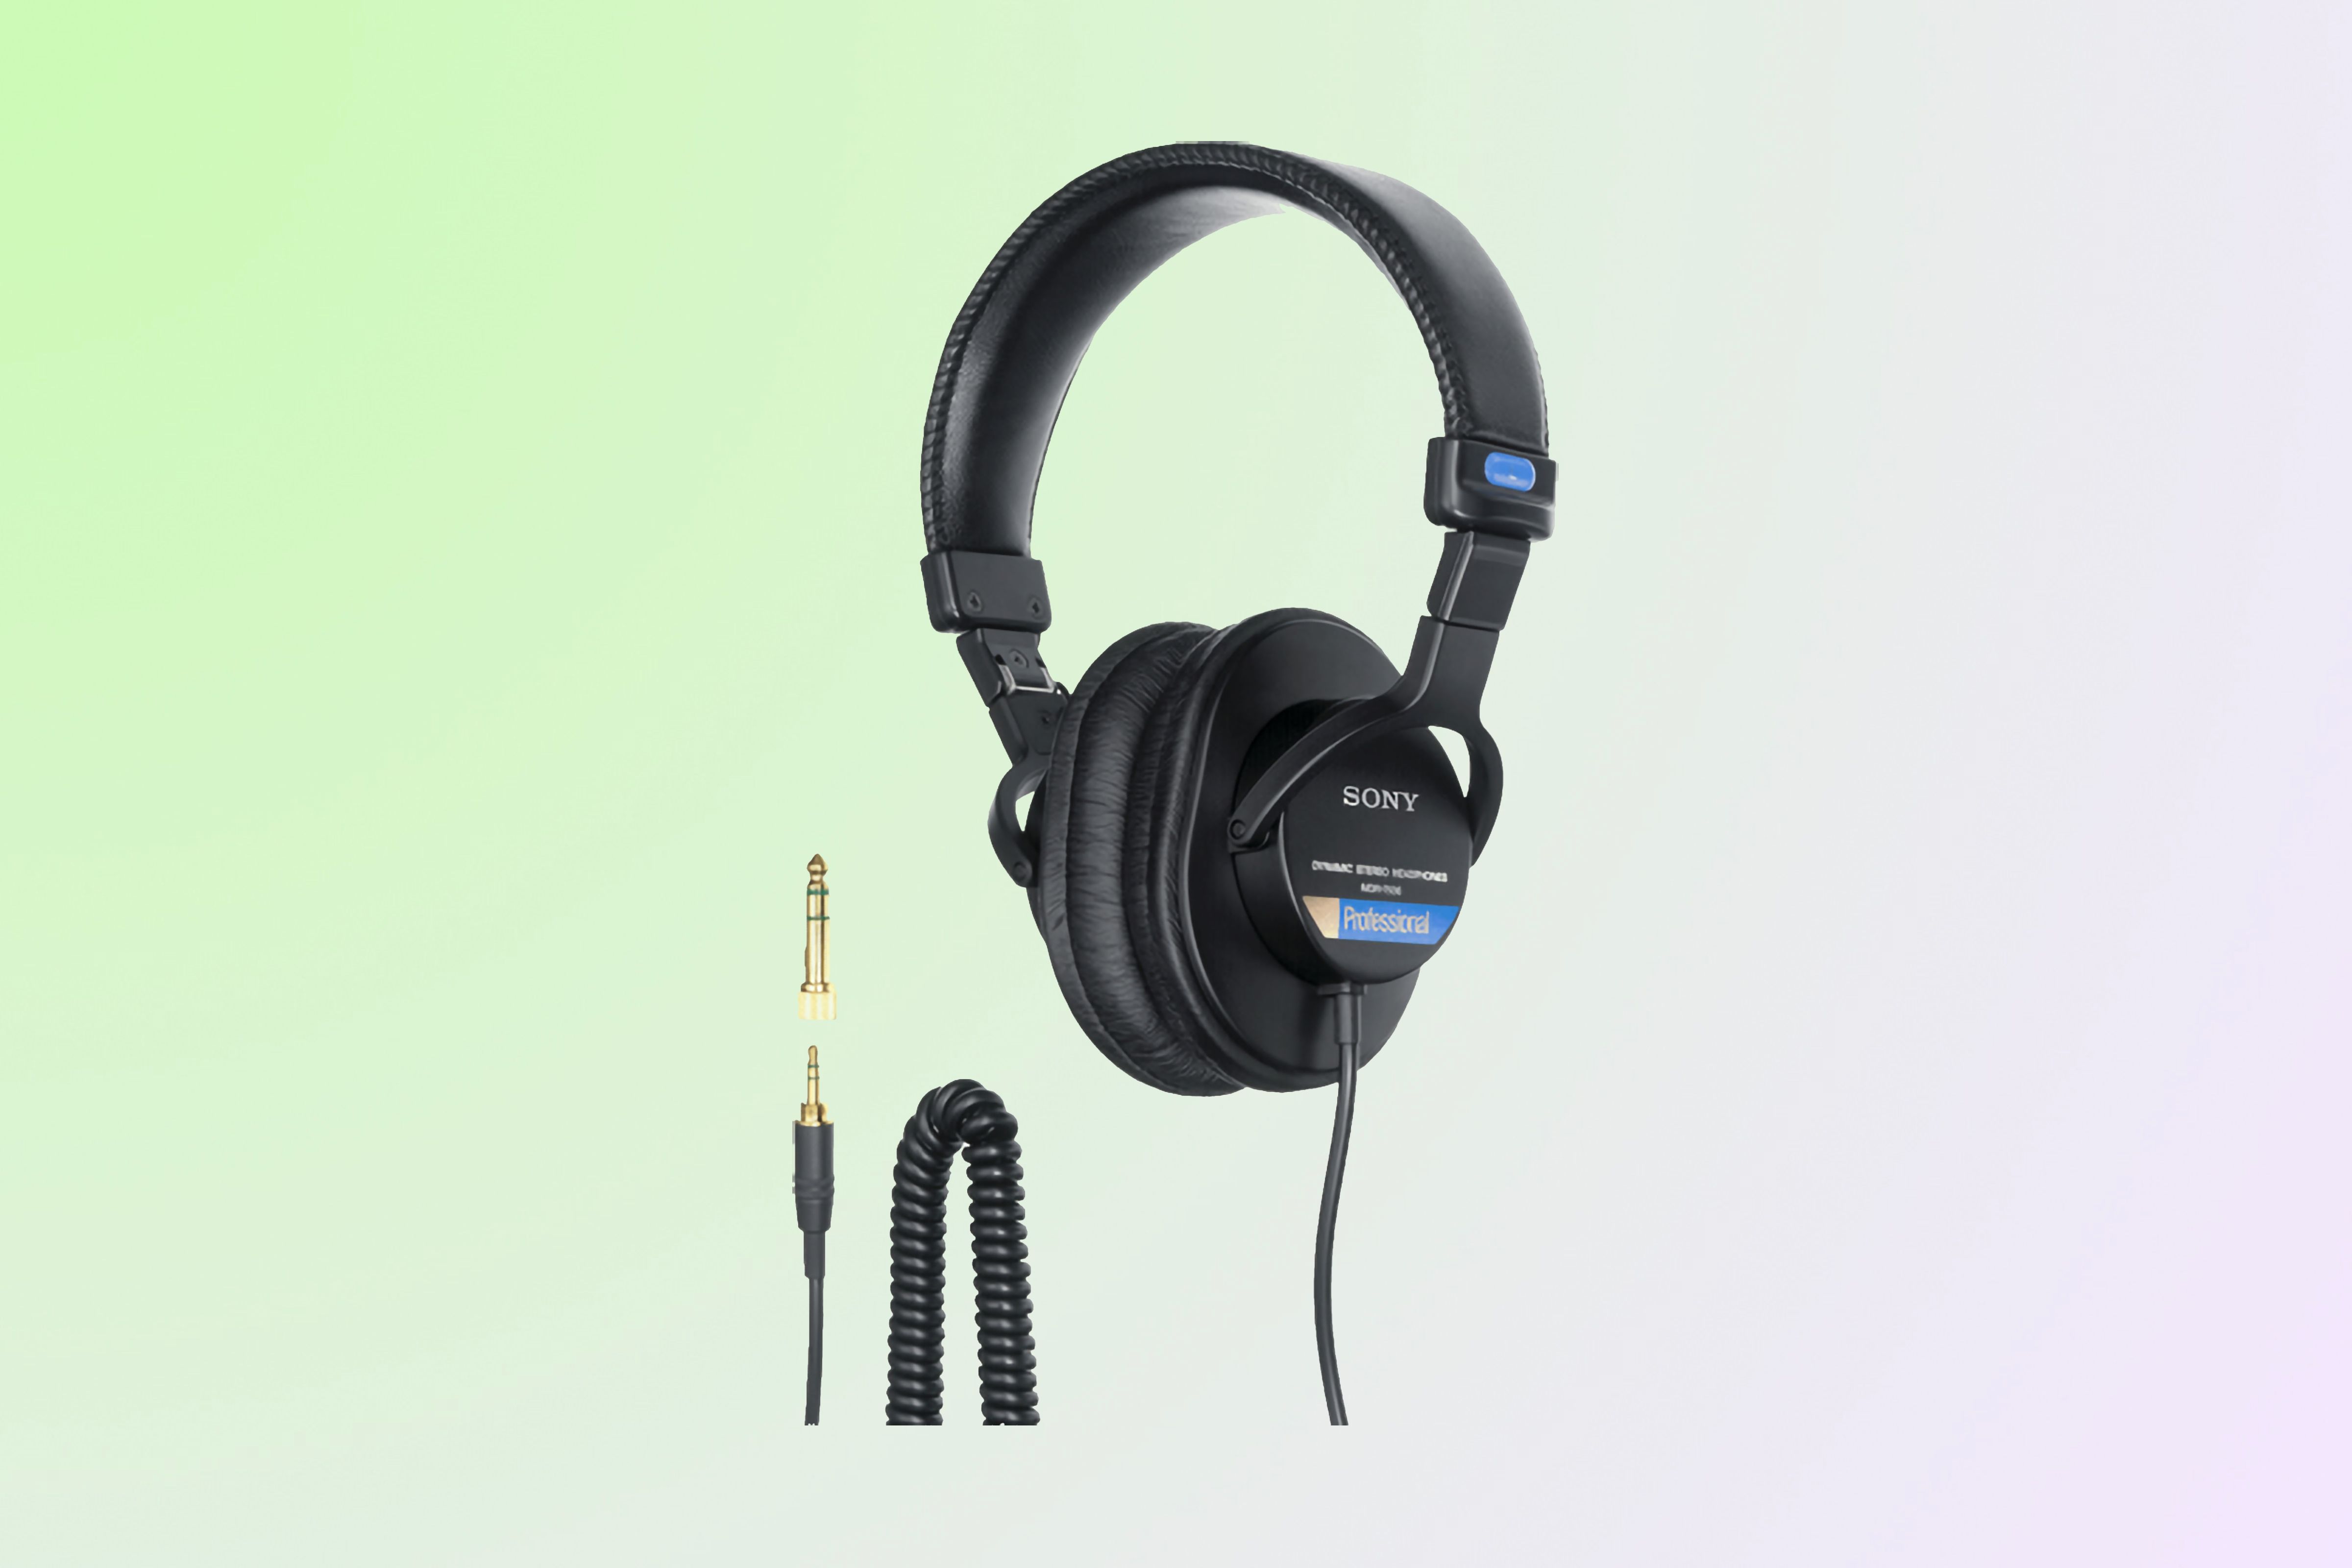 Black heaphones with a long coiled cable and cushion-y ear cups.